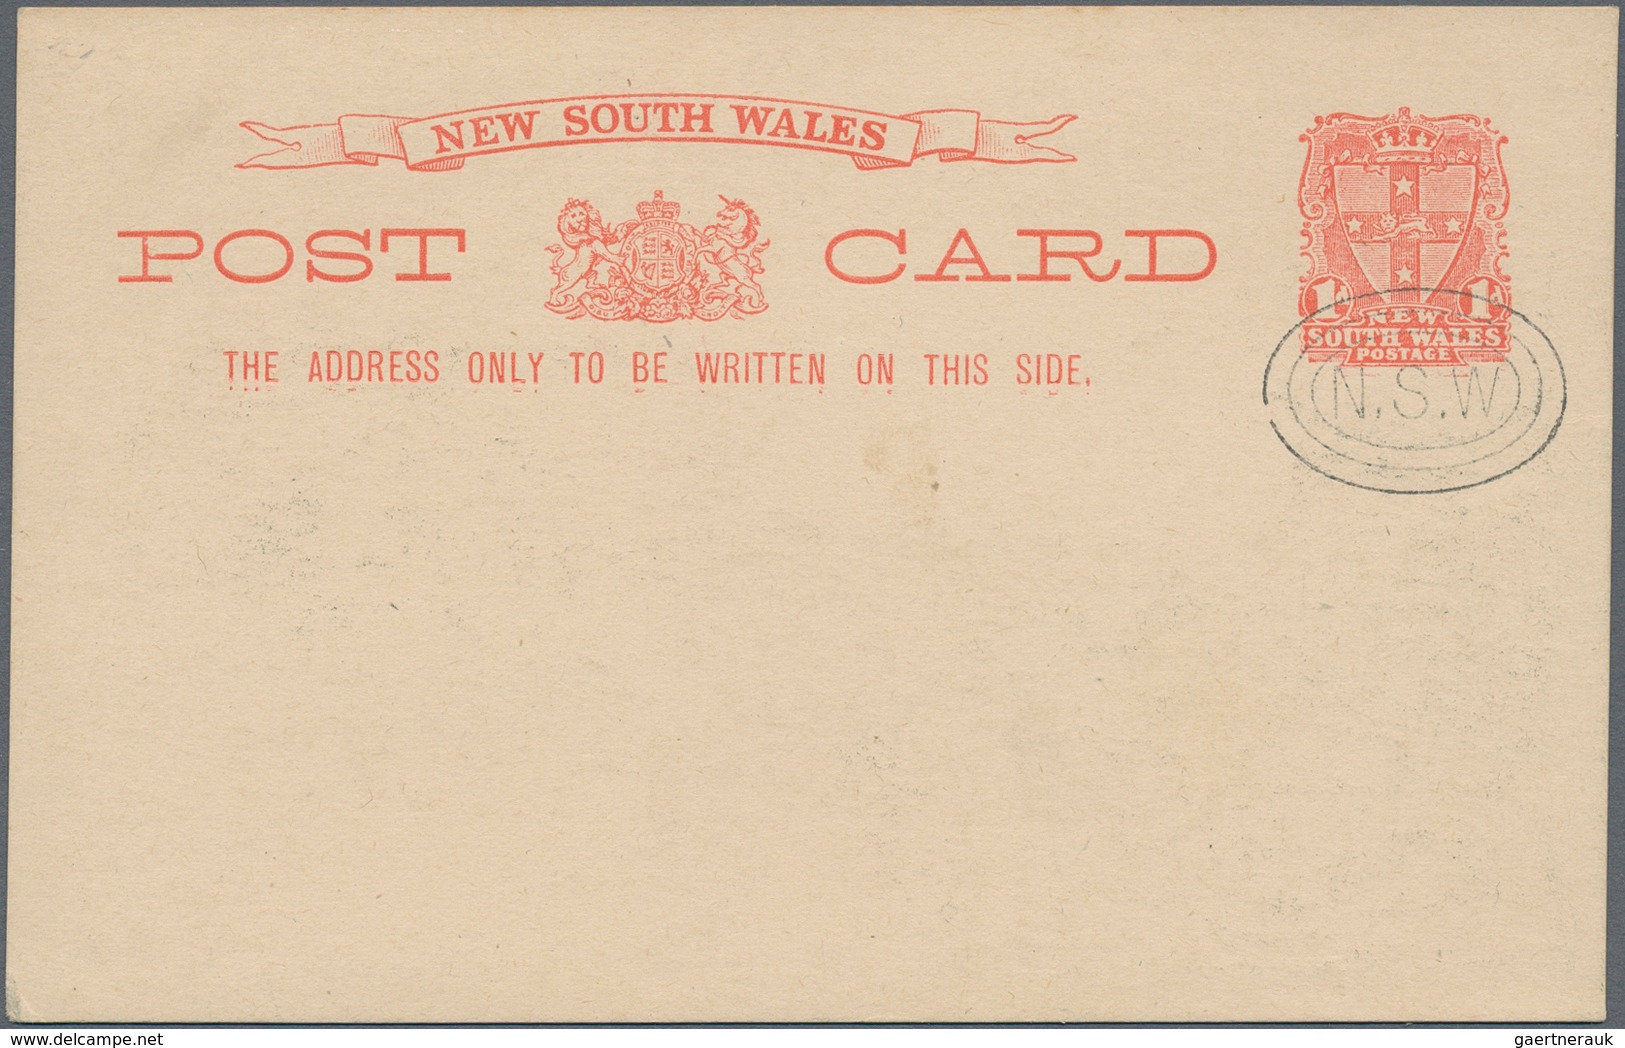 Neusüdwales: 1897, five pictorial stat. postcards Coat of arms 1d. red headed 'Greetings' or 'Christ